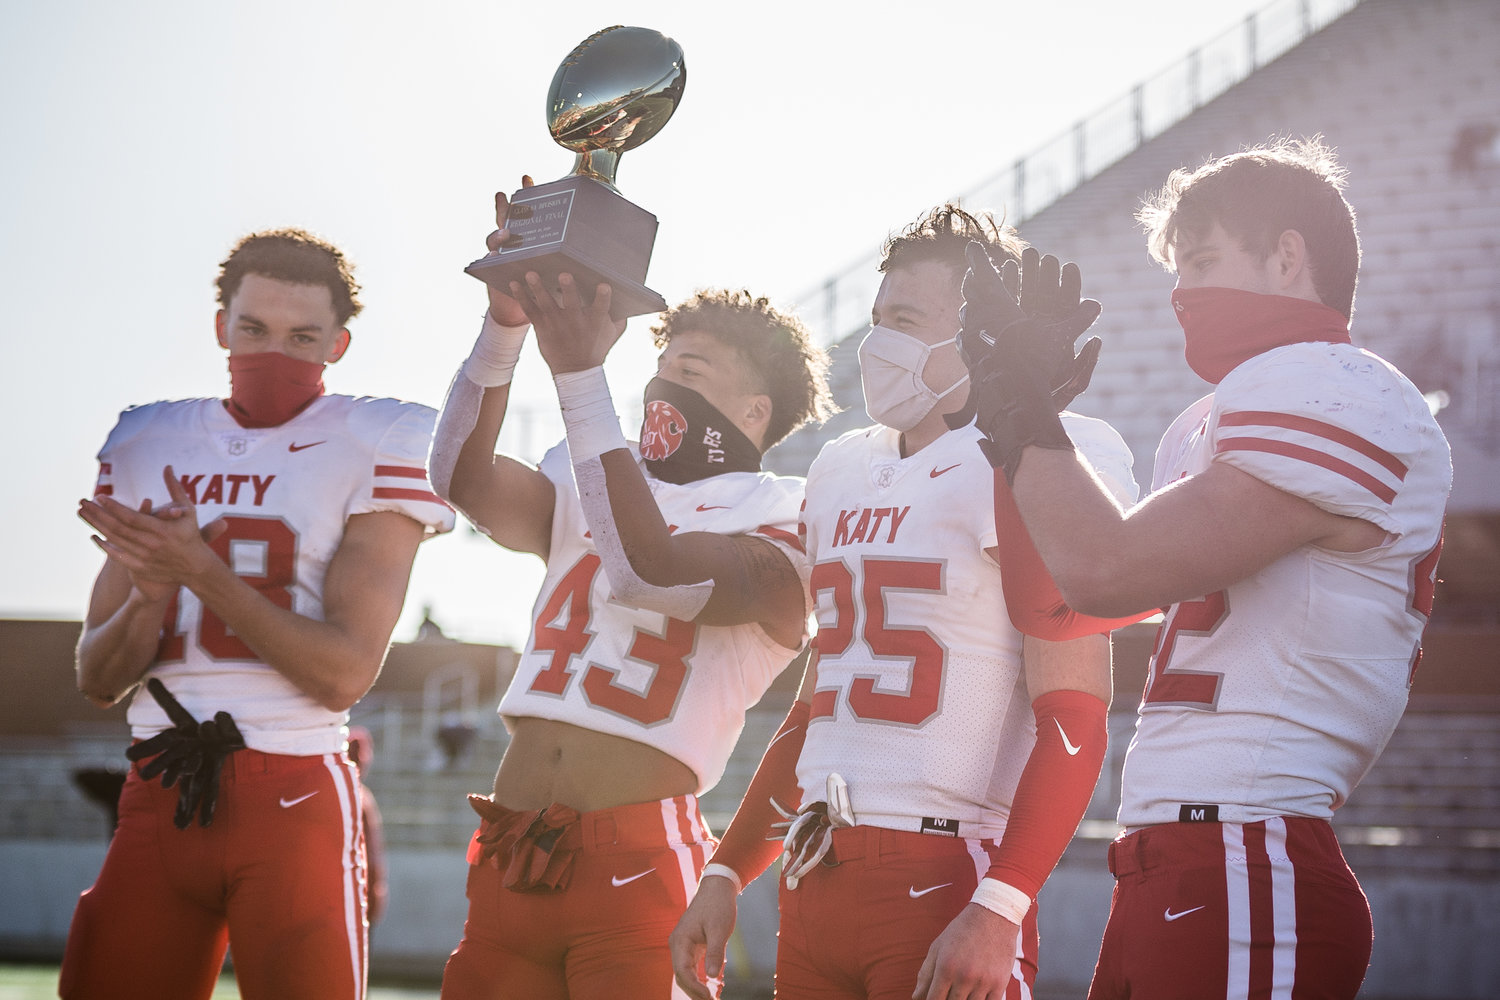 Katy High's team captains, from left to right Taylor Saulsberry, Dalton Johnson, Shepherd Bowling and Ty Kana, hold up the regional final trophy following the Tigers' 49-24 win over Shadow Creek on Dec. 26 at Freedom Field.